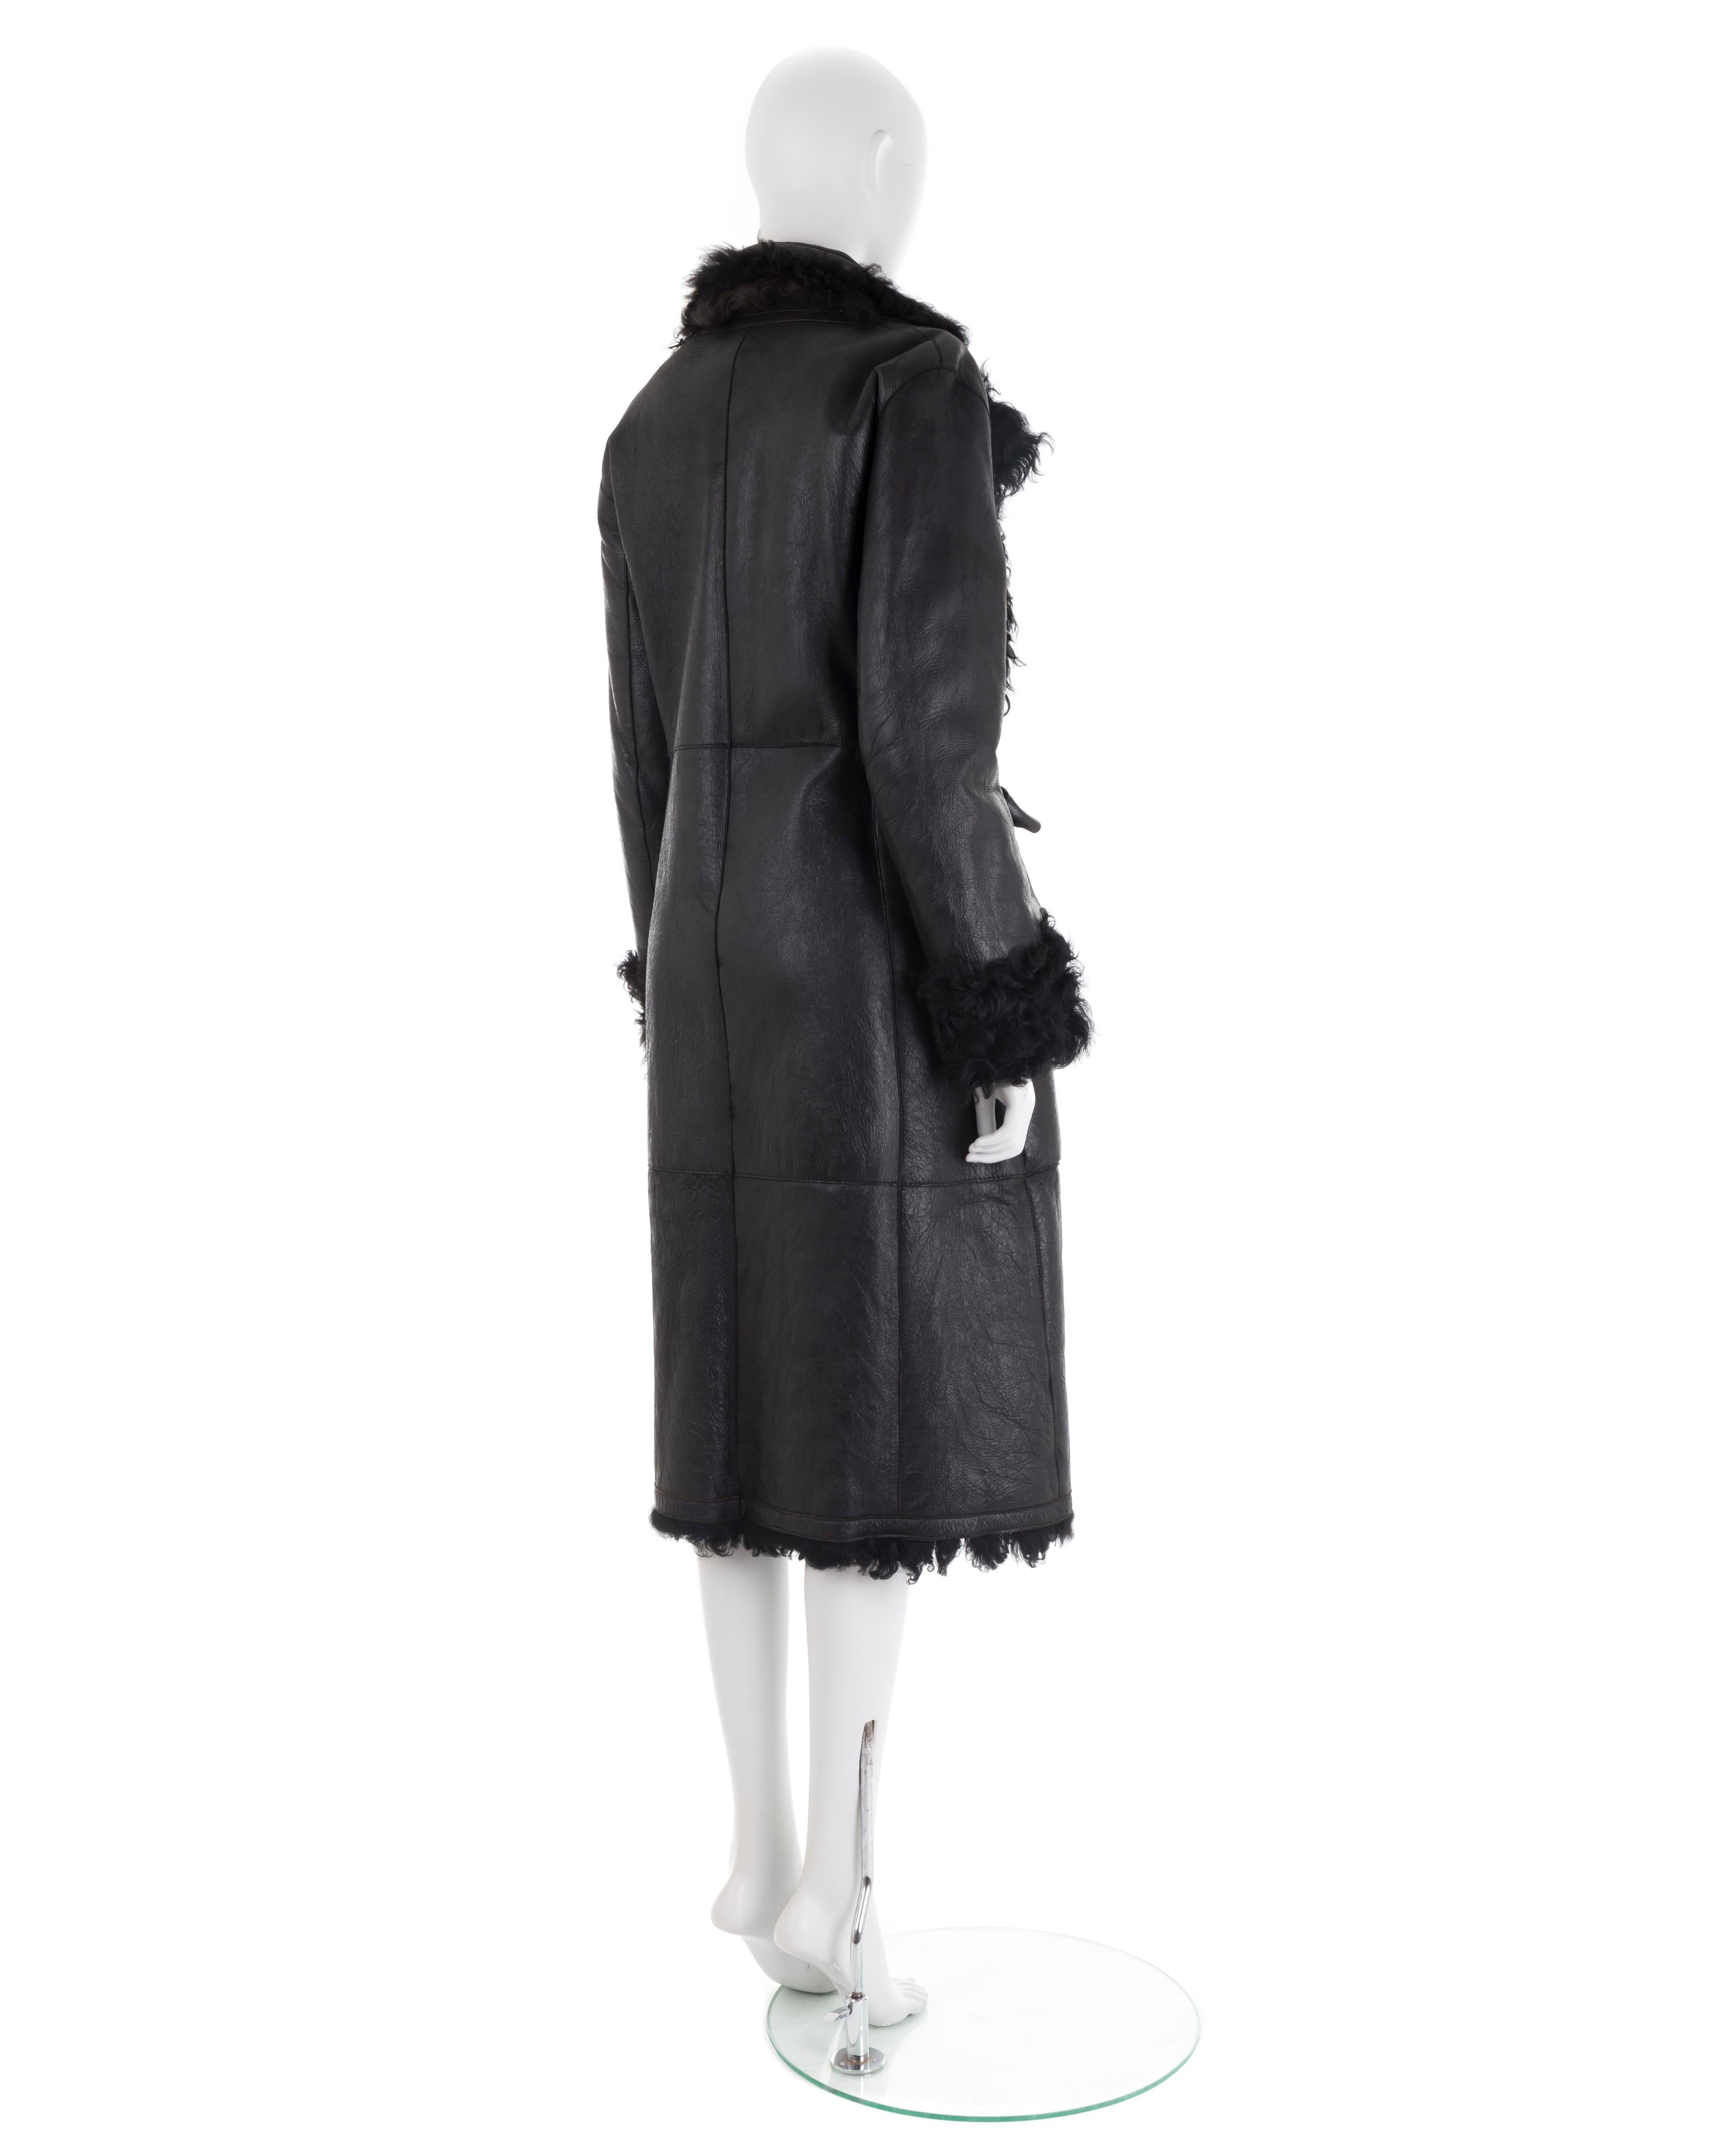 Dirk Bikkembergs F/W 2003 black Mongolian lamb fur leather coat In Excellent Condition For Sale In Rome, IT